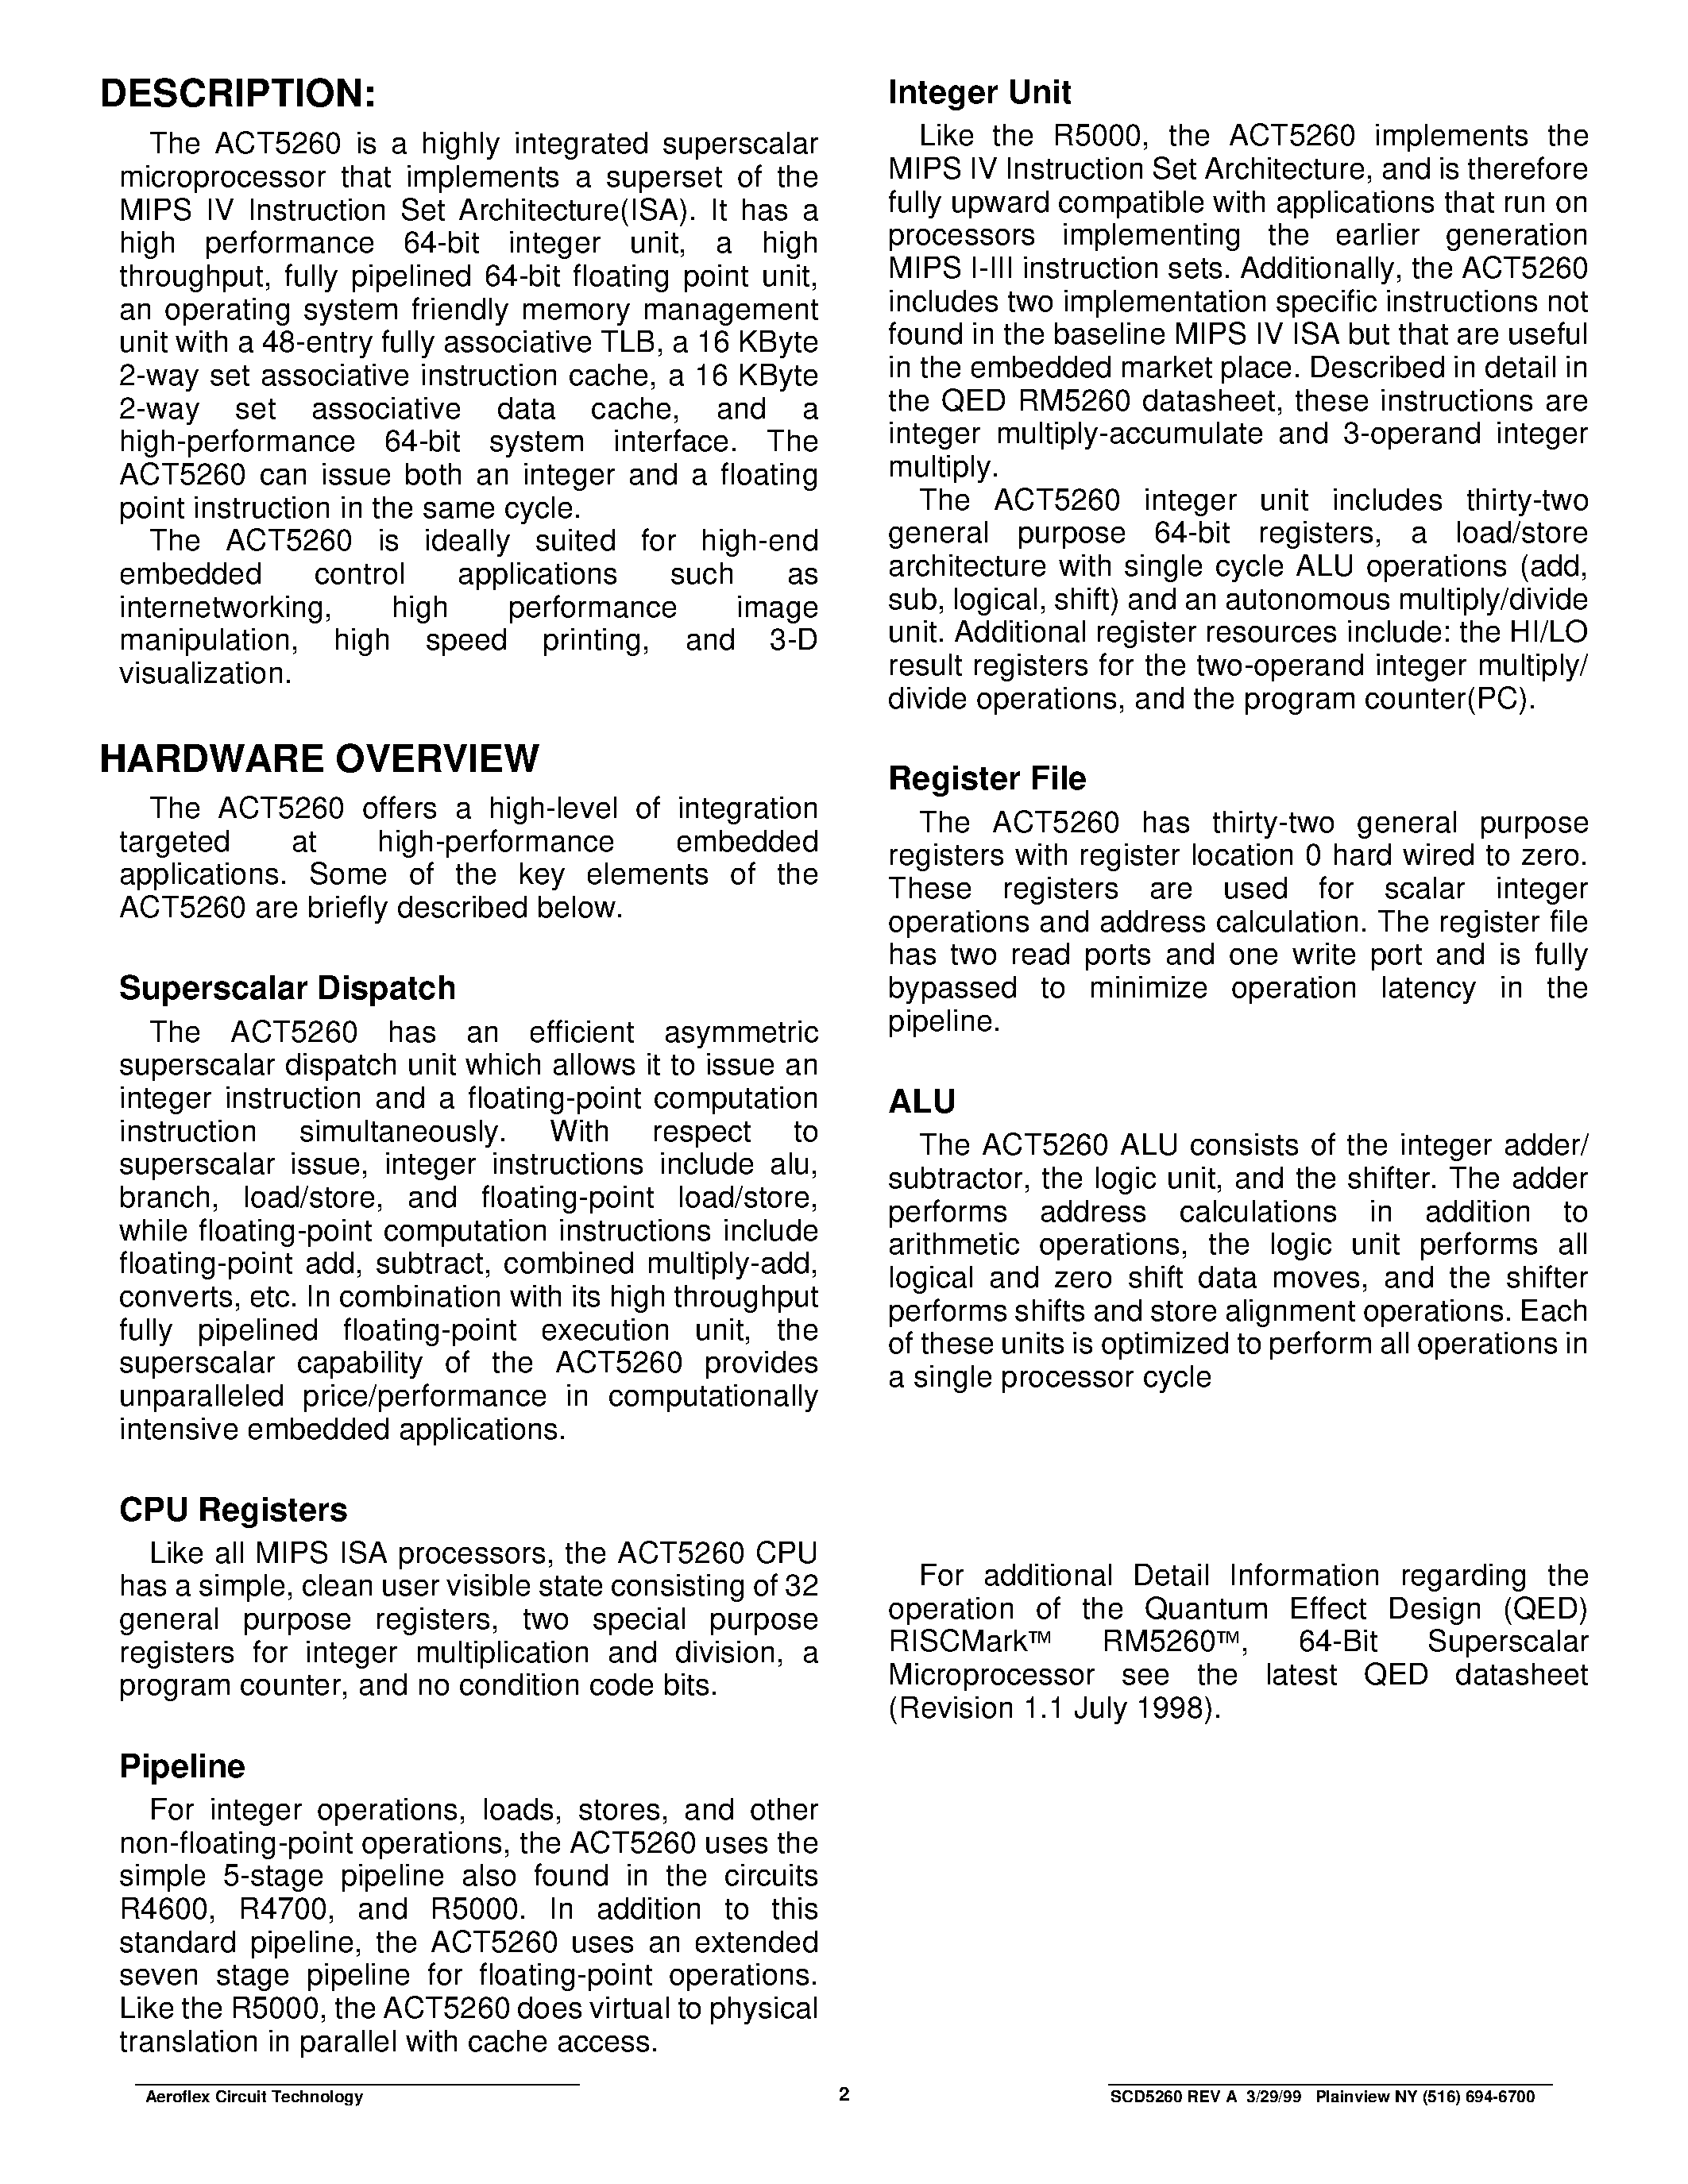 Datasheet ACT-5260PC-100P10I - ACT5260 64-Bit Superscaler Microprocessor page 2